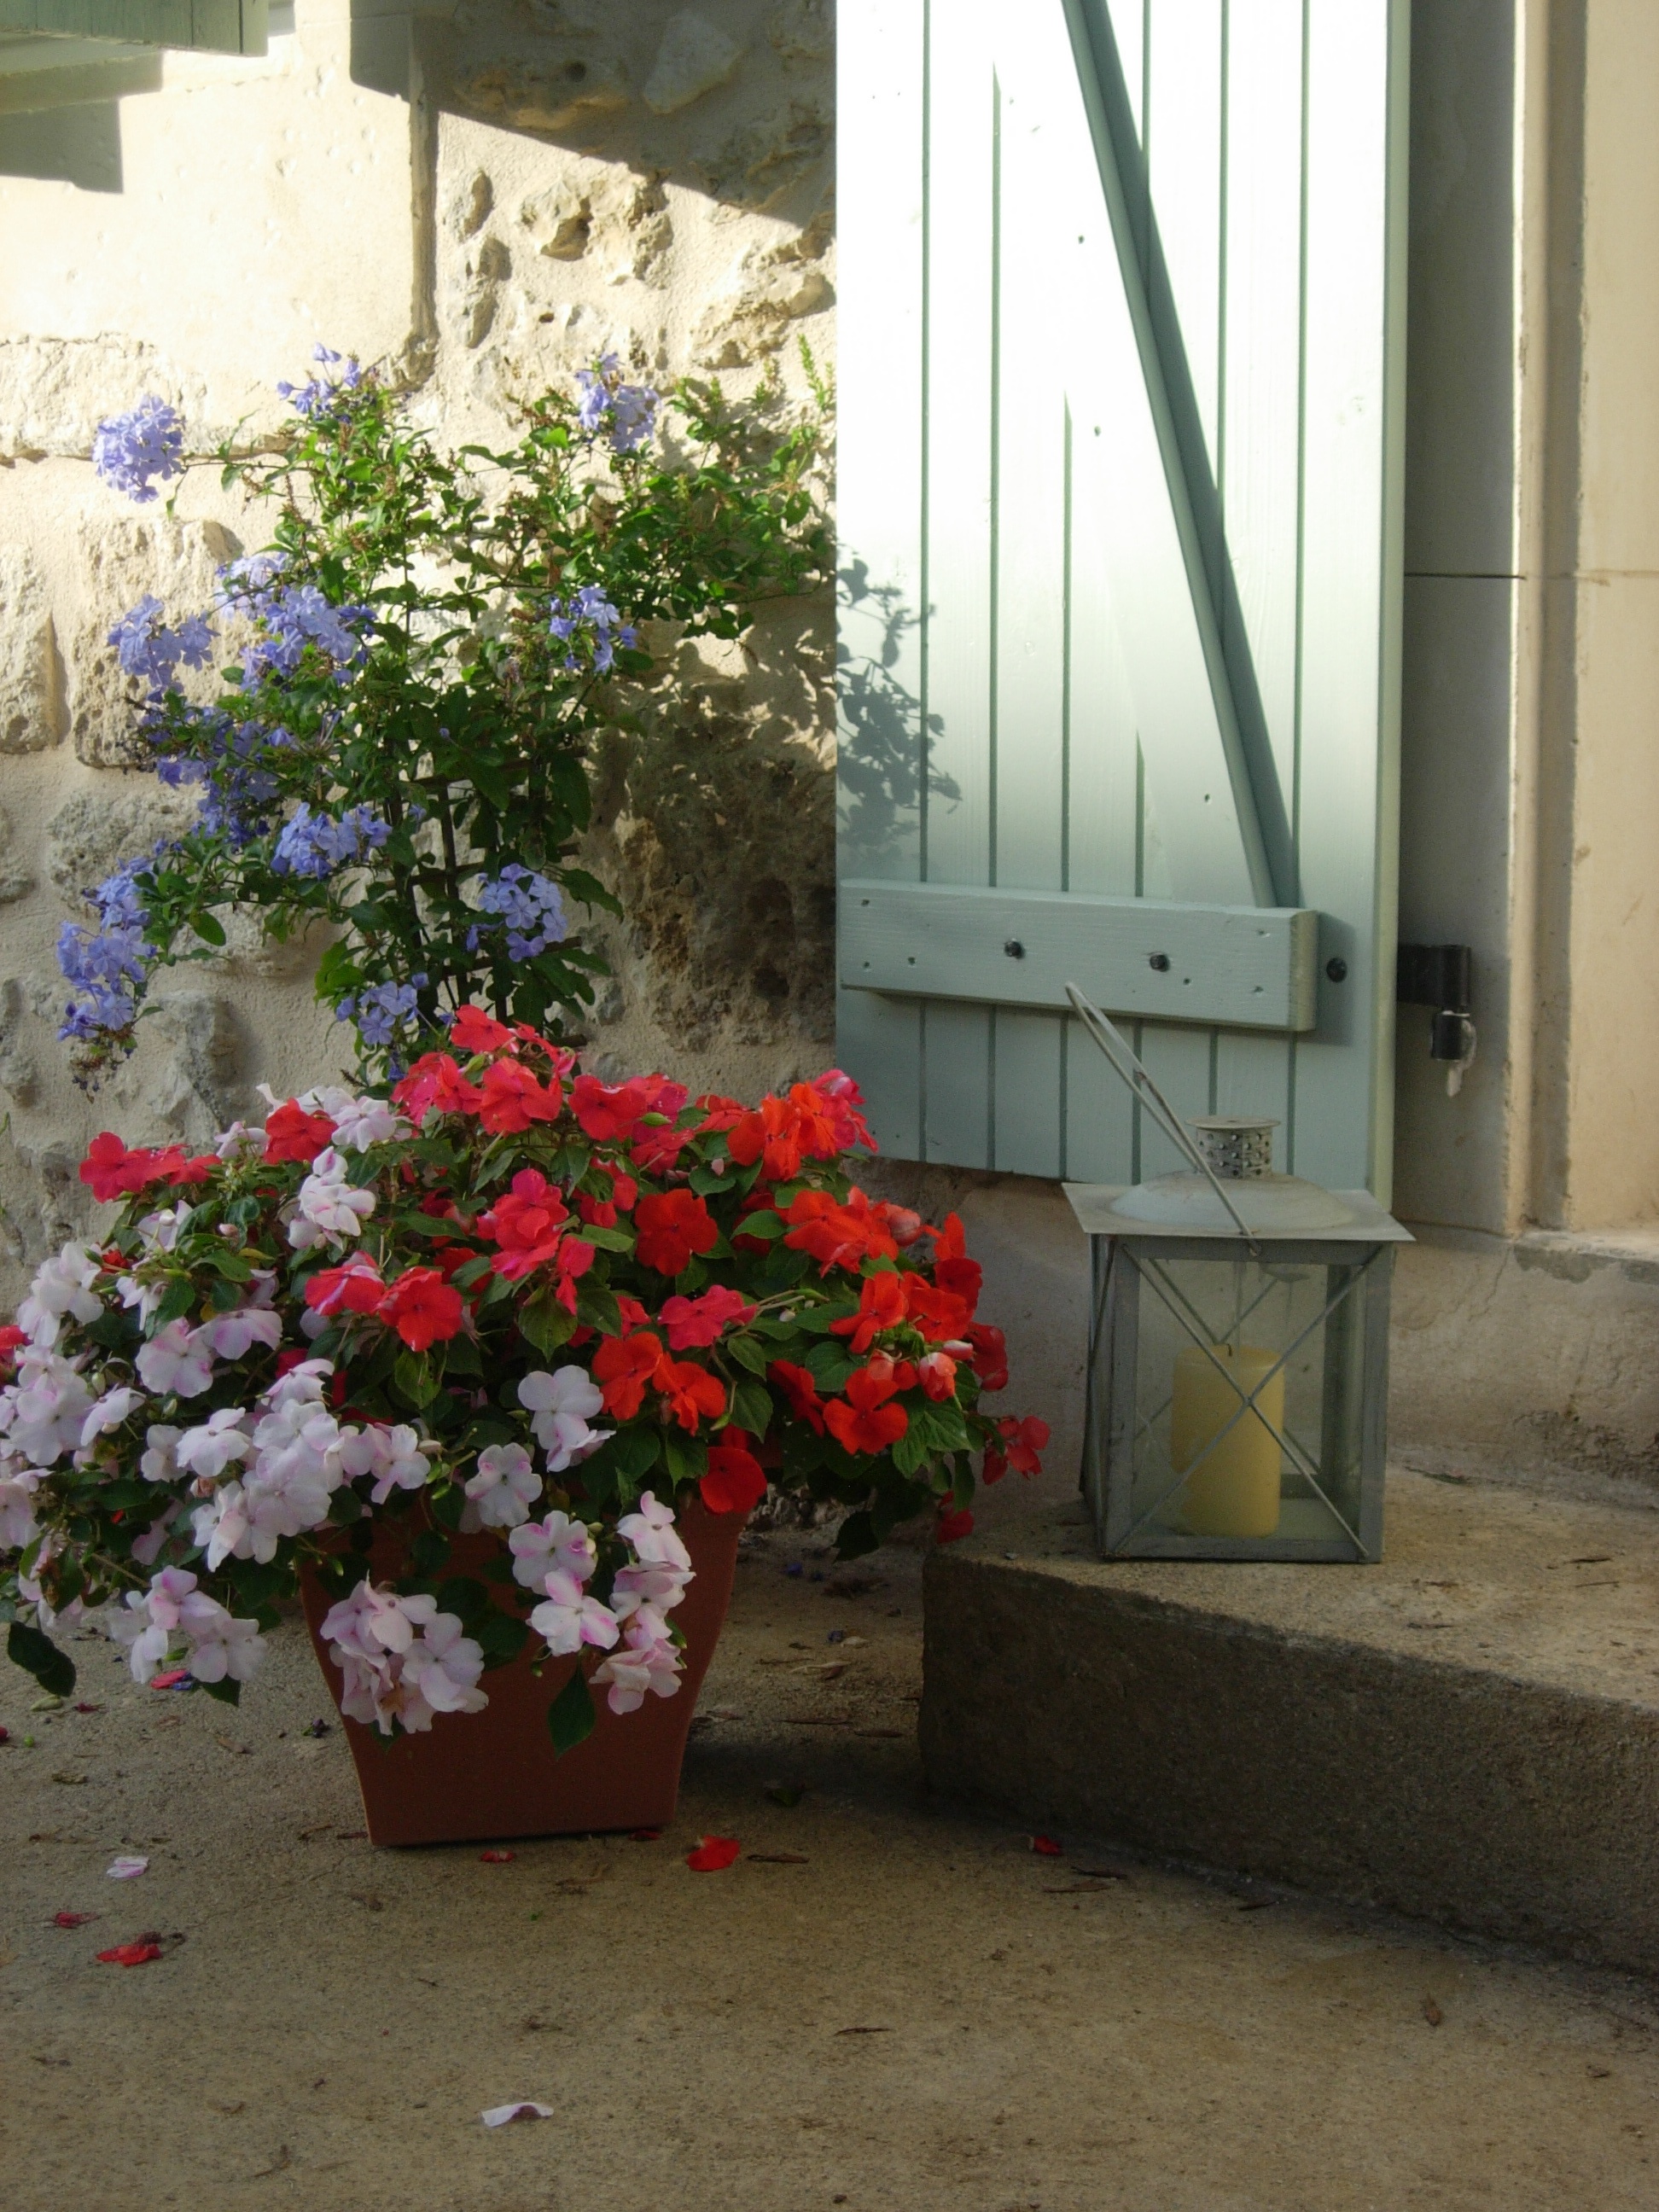 Welcoming flowers at Barrusclet